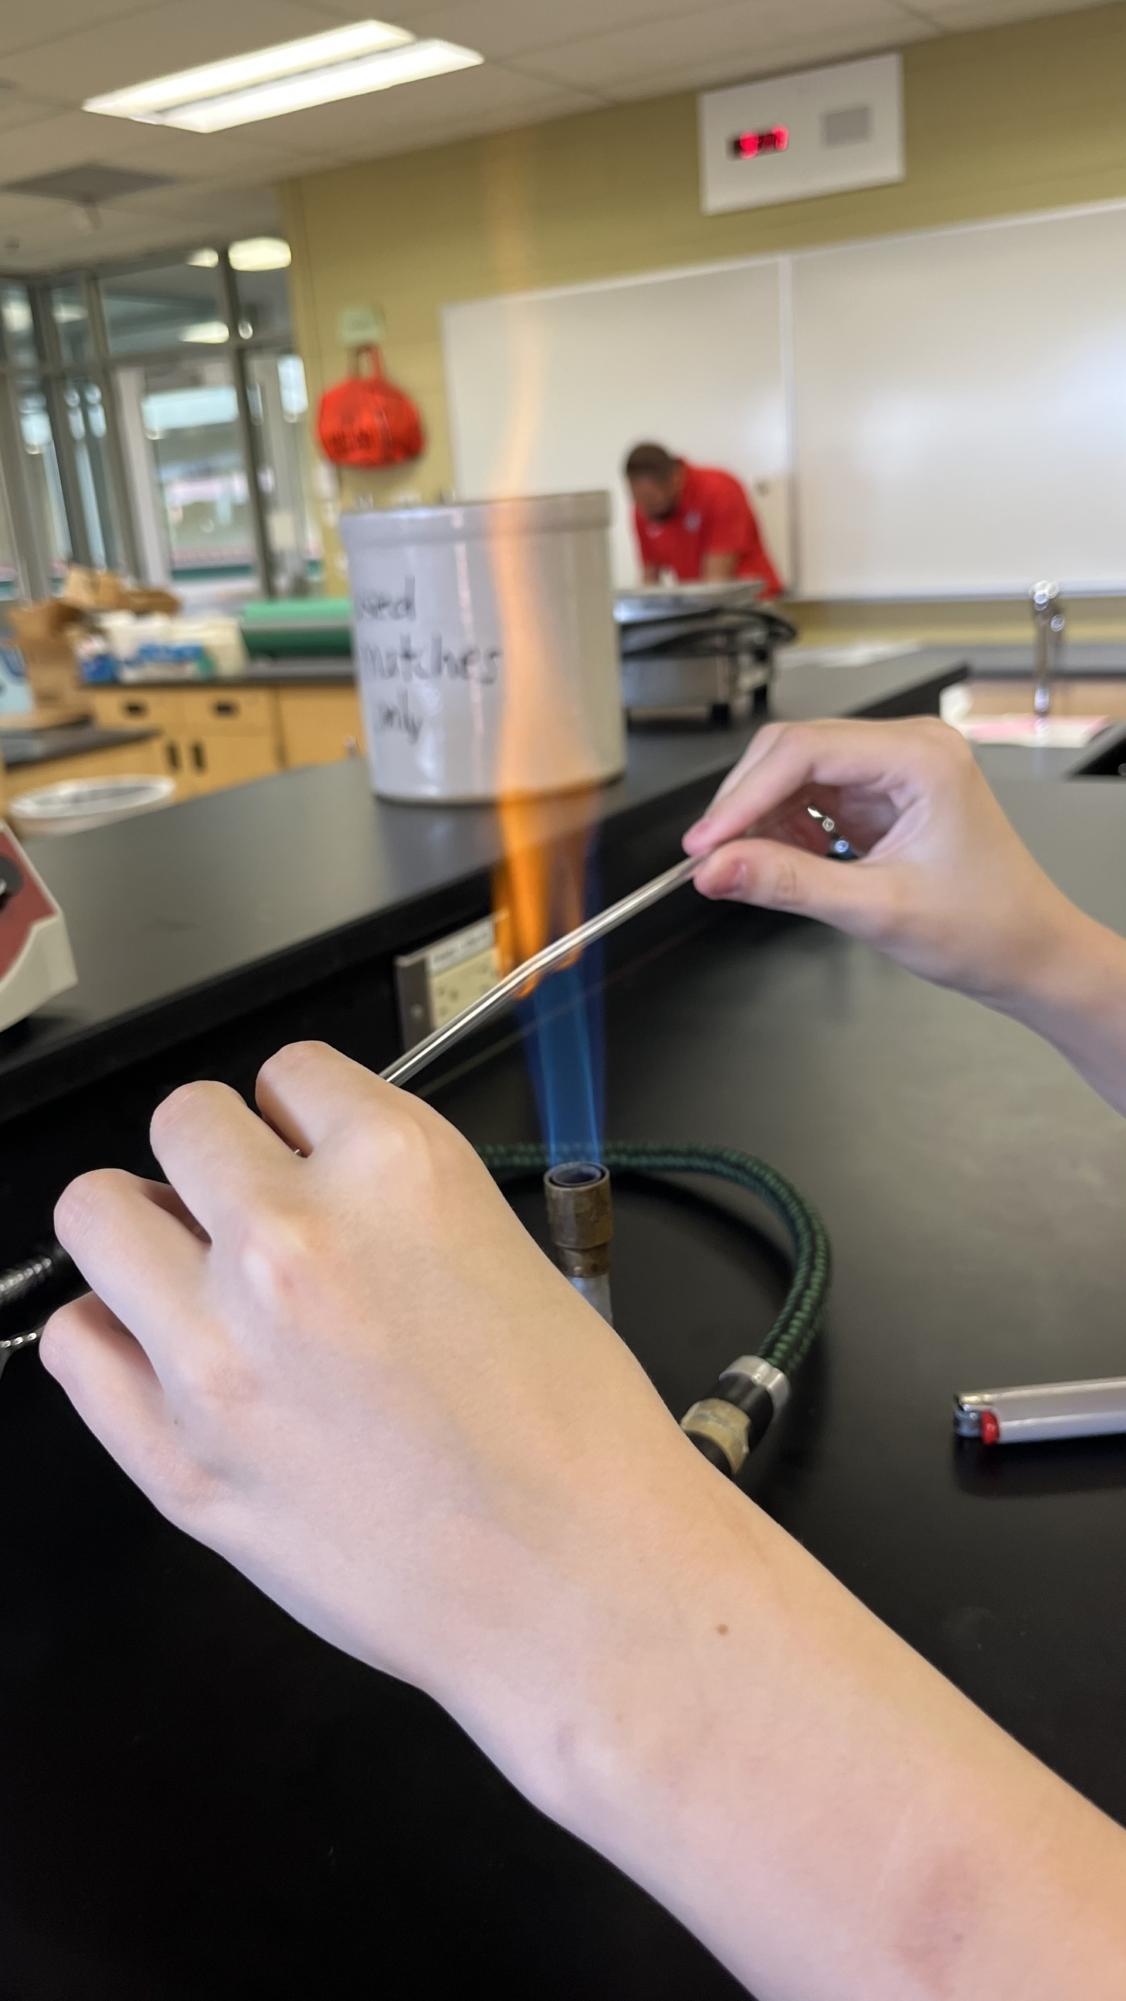 Chemistry+Fire+Burner+Experiments